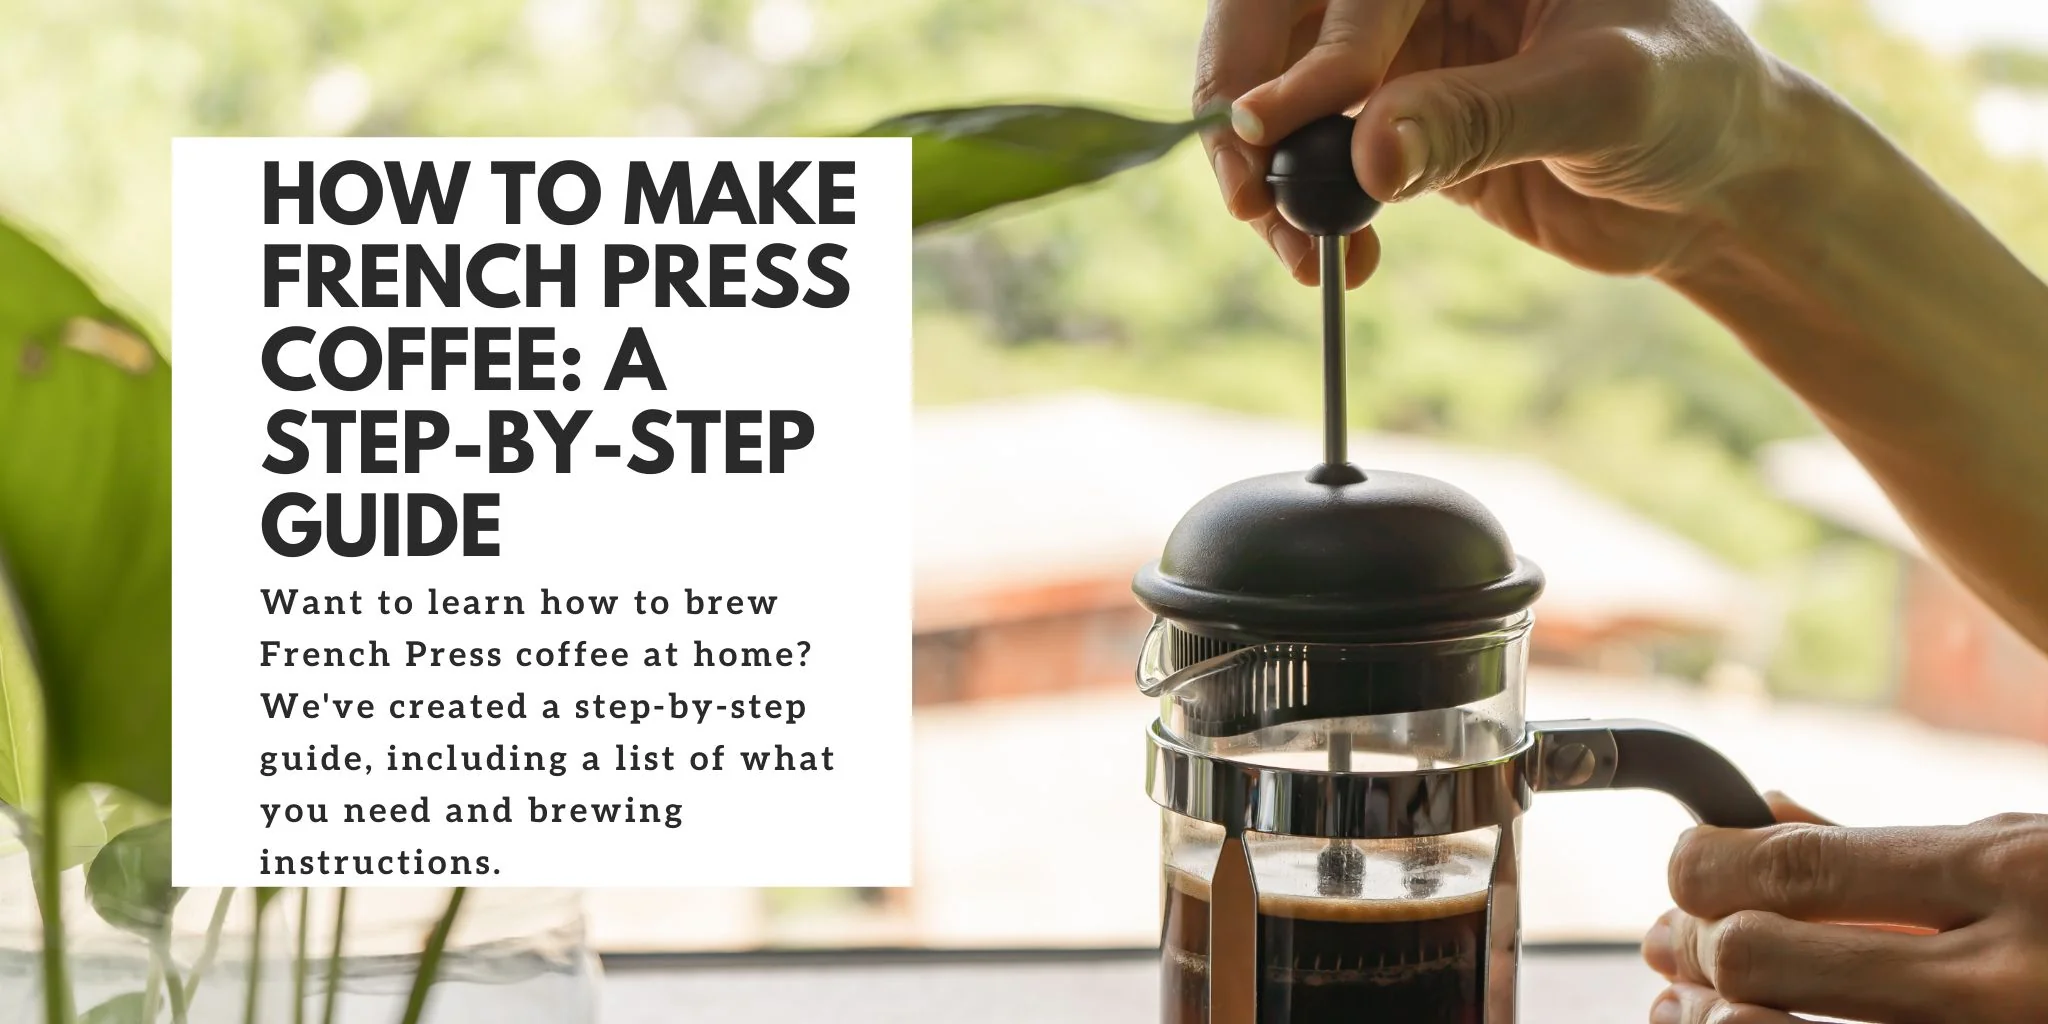 Step-by-step brewing guide for French press coffee